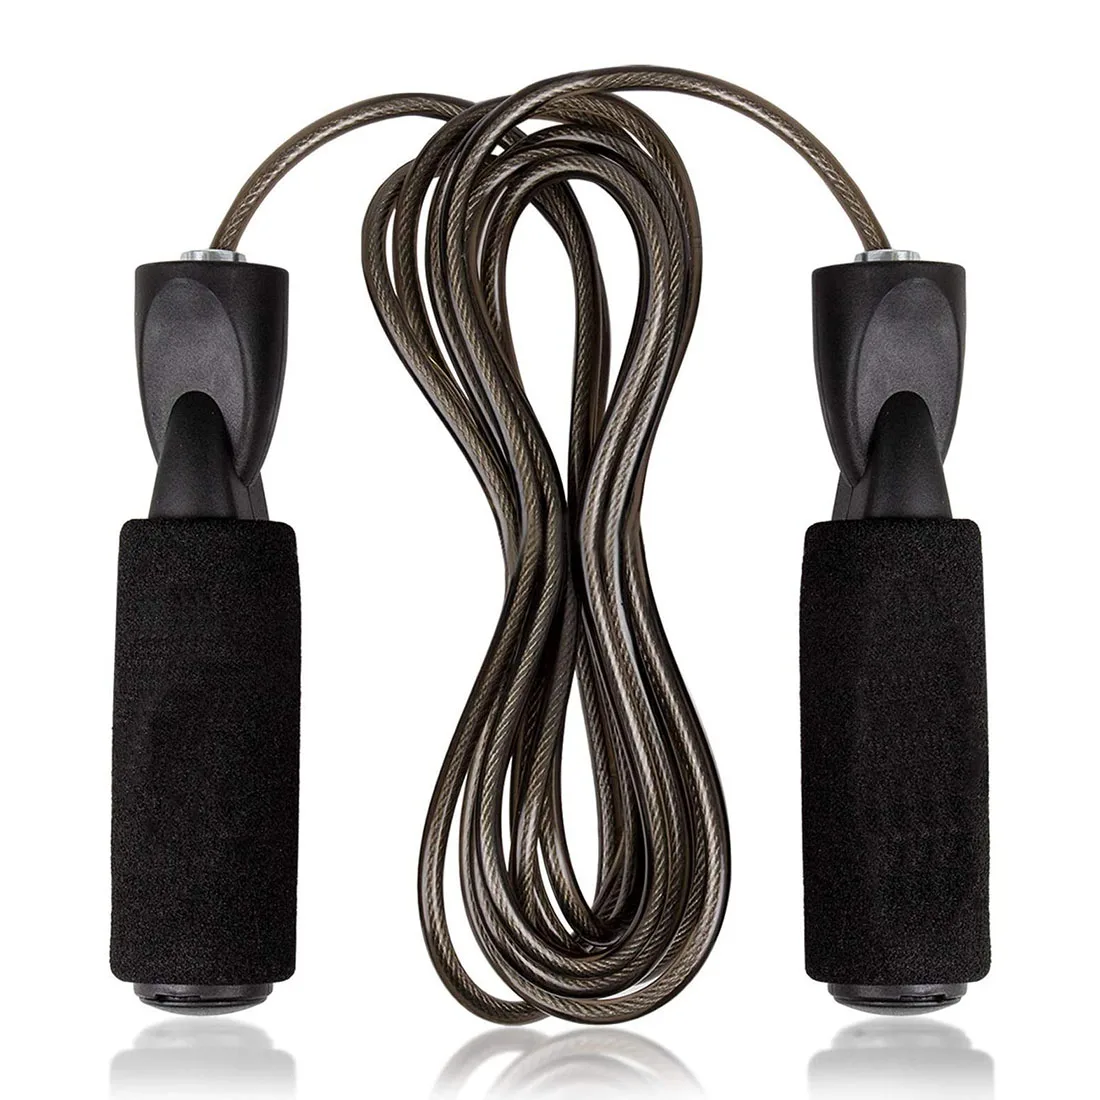 Adjustable Length Jump Rope for Speed Jumping,Skipping Workout,Fitness Exercise Training 